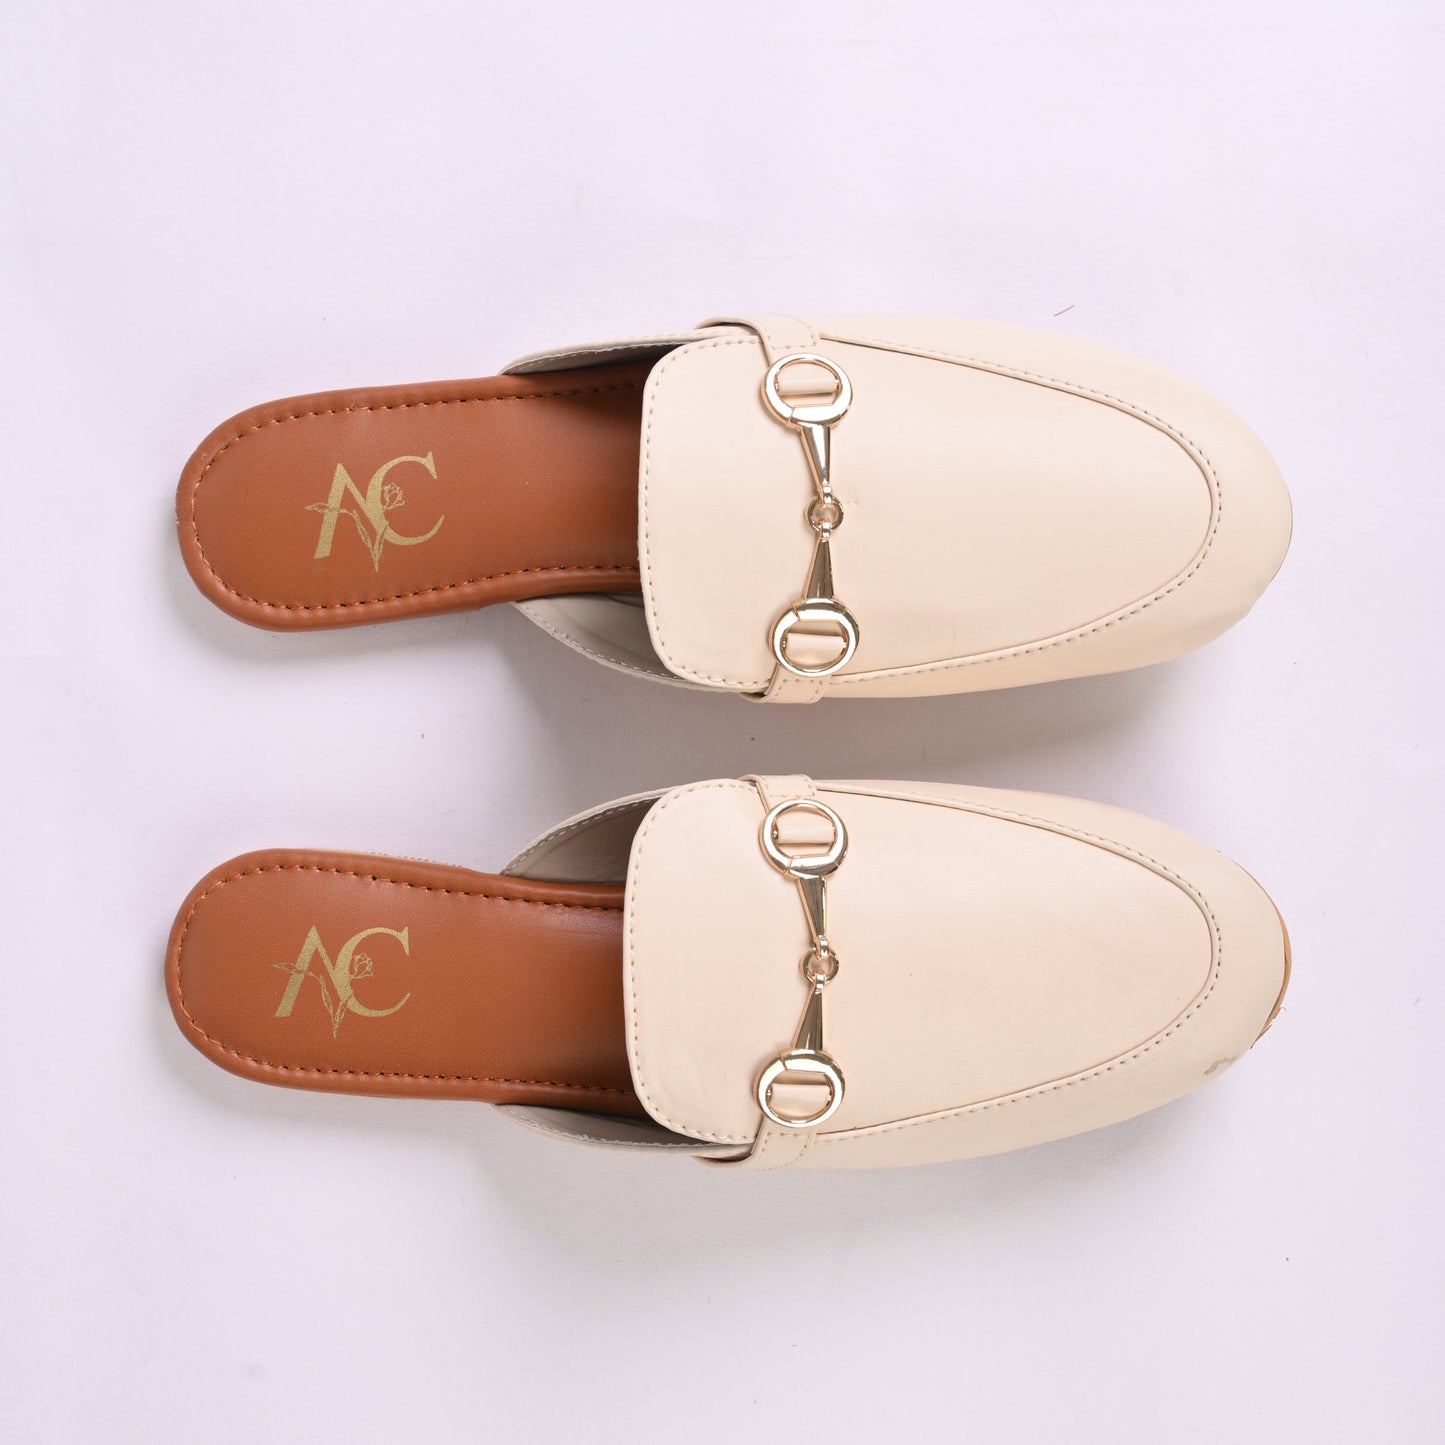 Buckled Mules For Girls – Cream Color